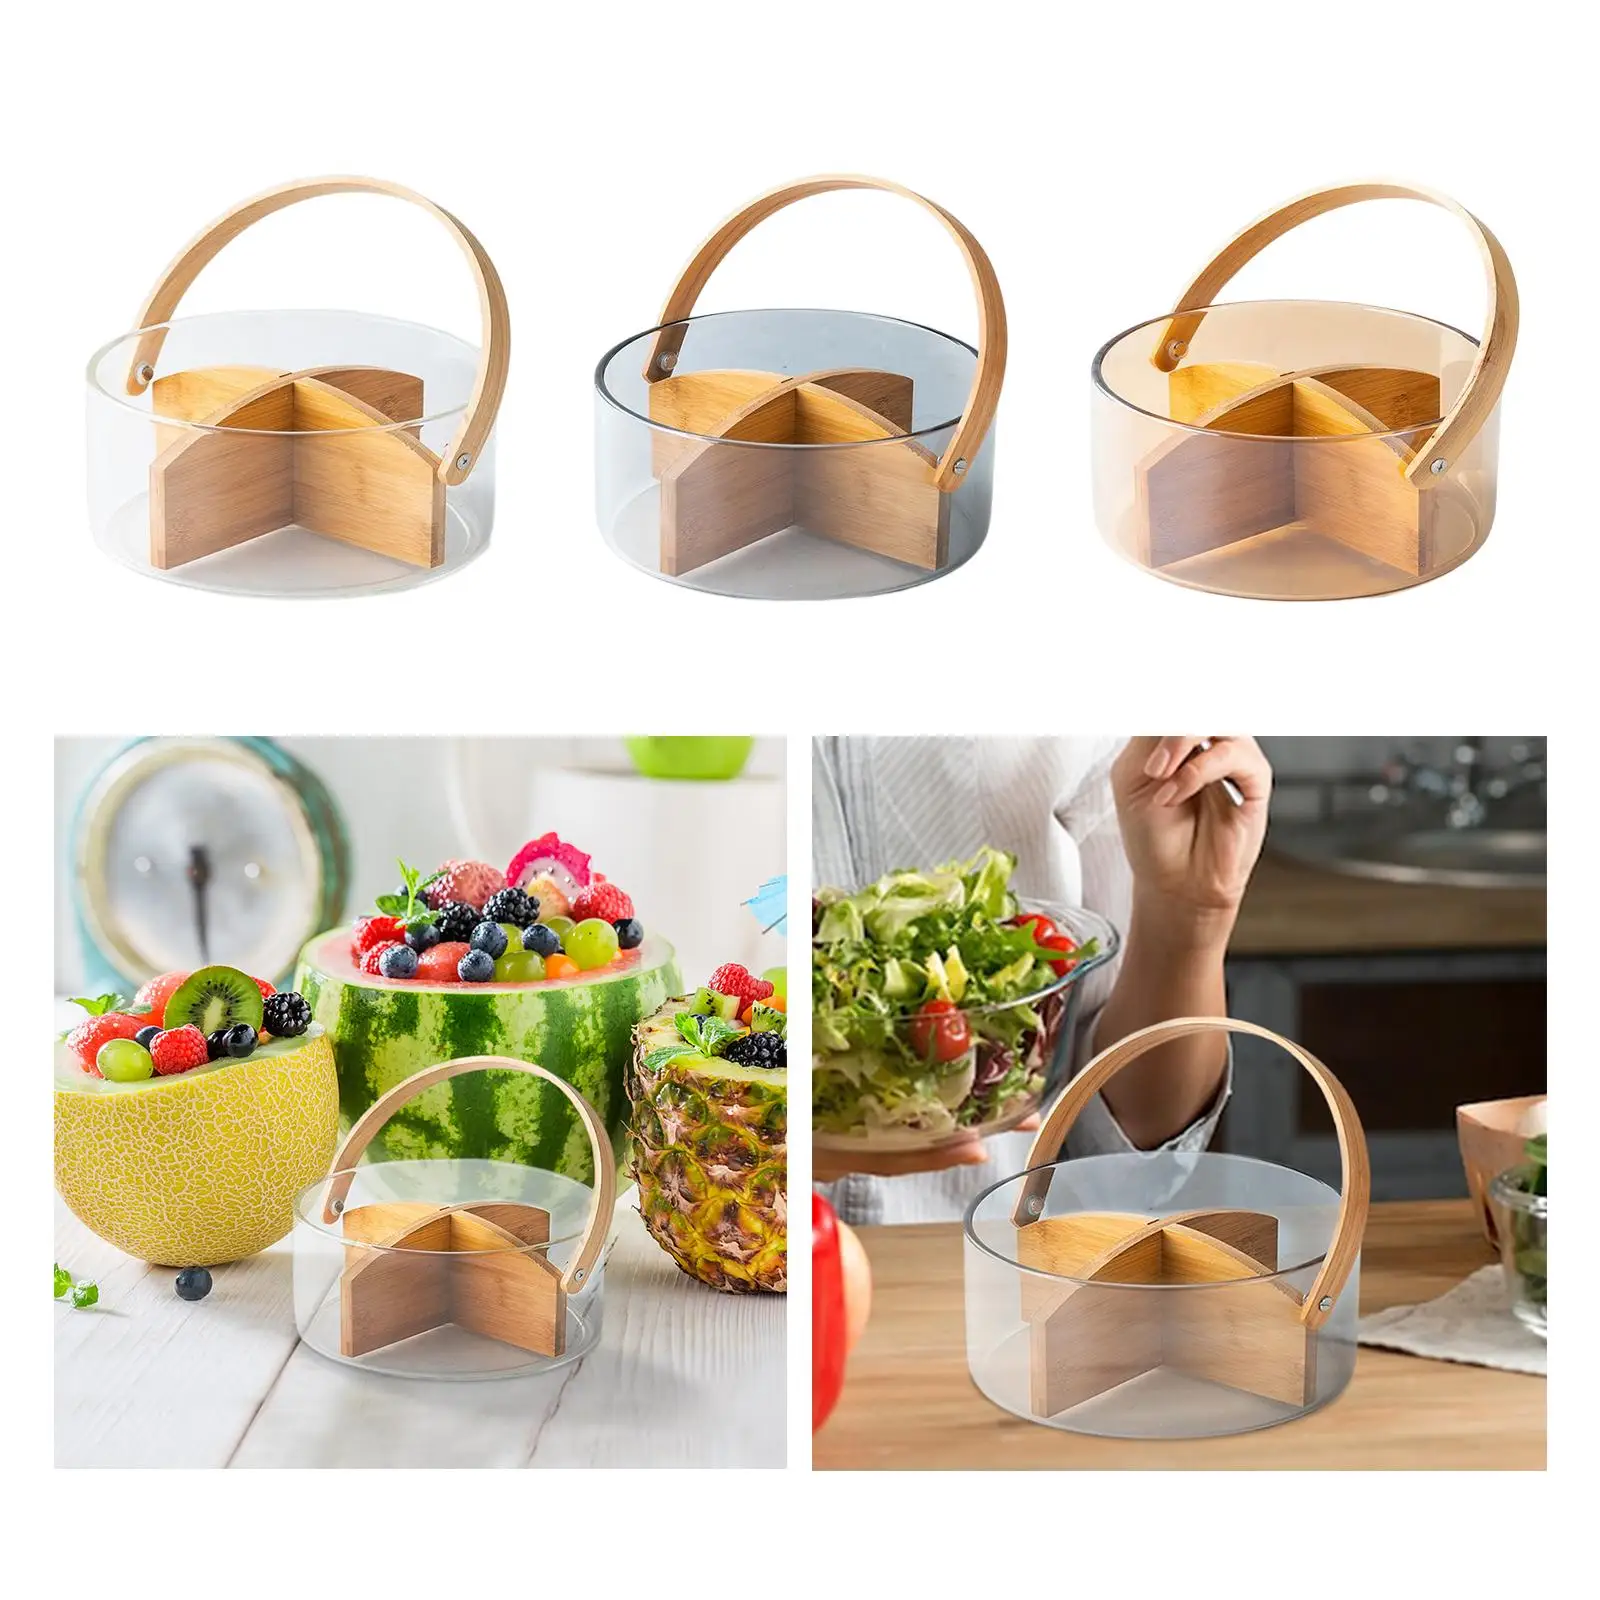 Outdoor Hand Basket Table Fruit Plate Fruit Organizer for Camping Bread Farm Pantry